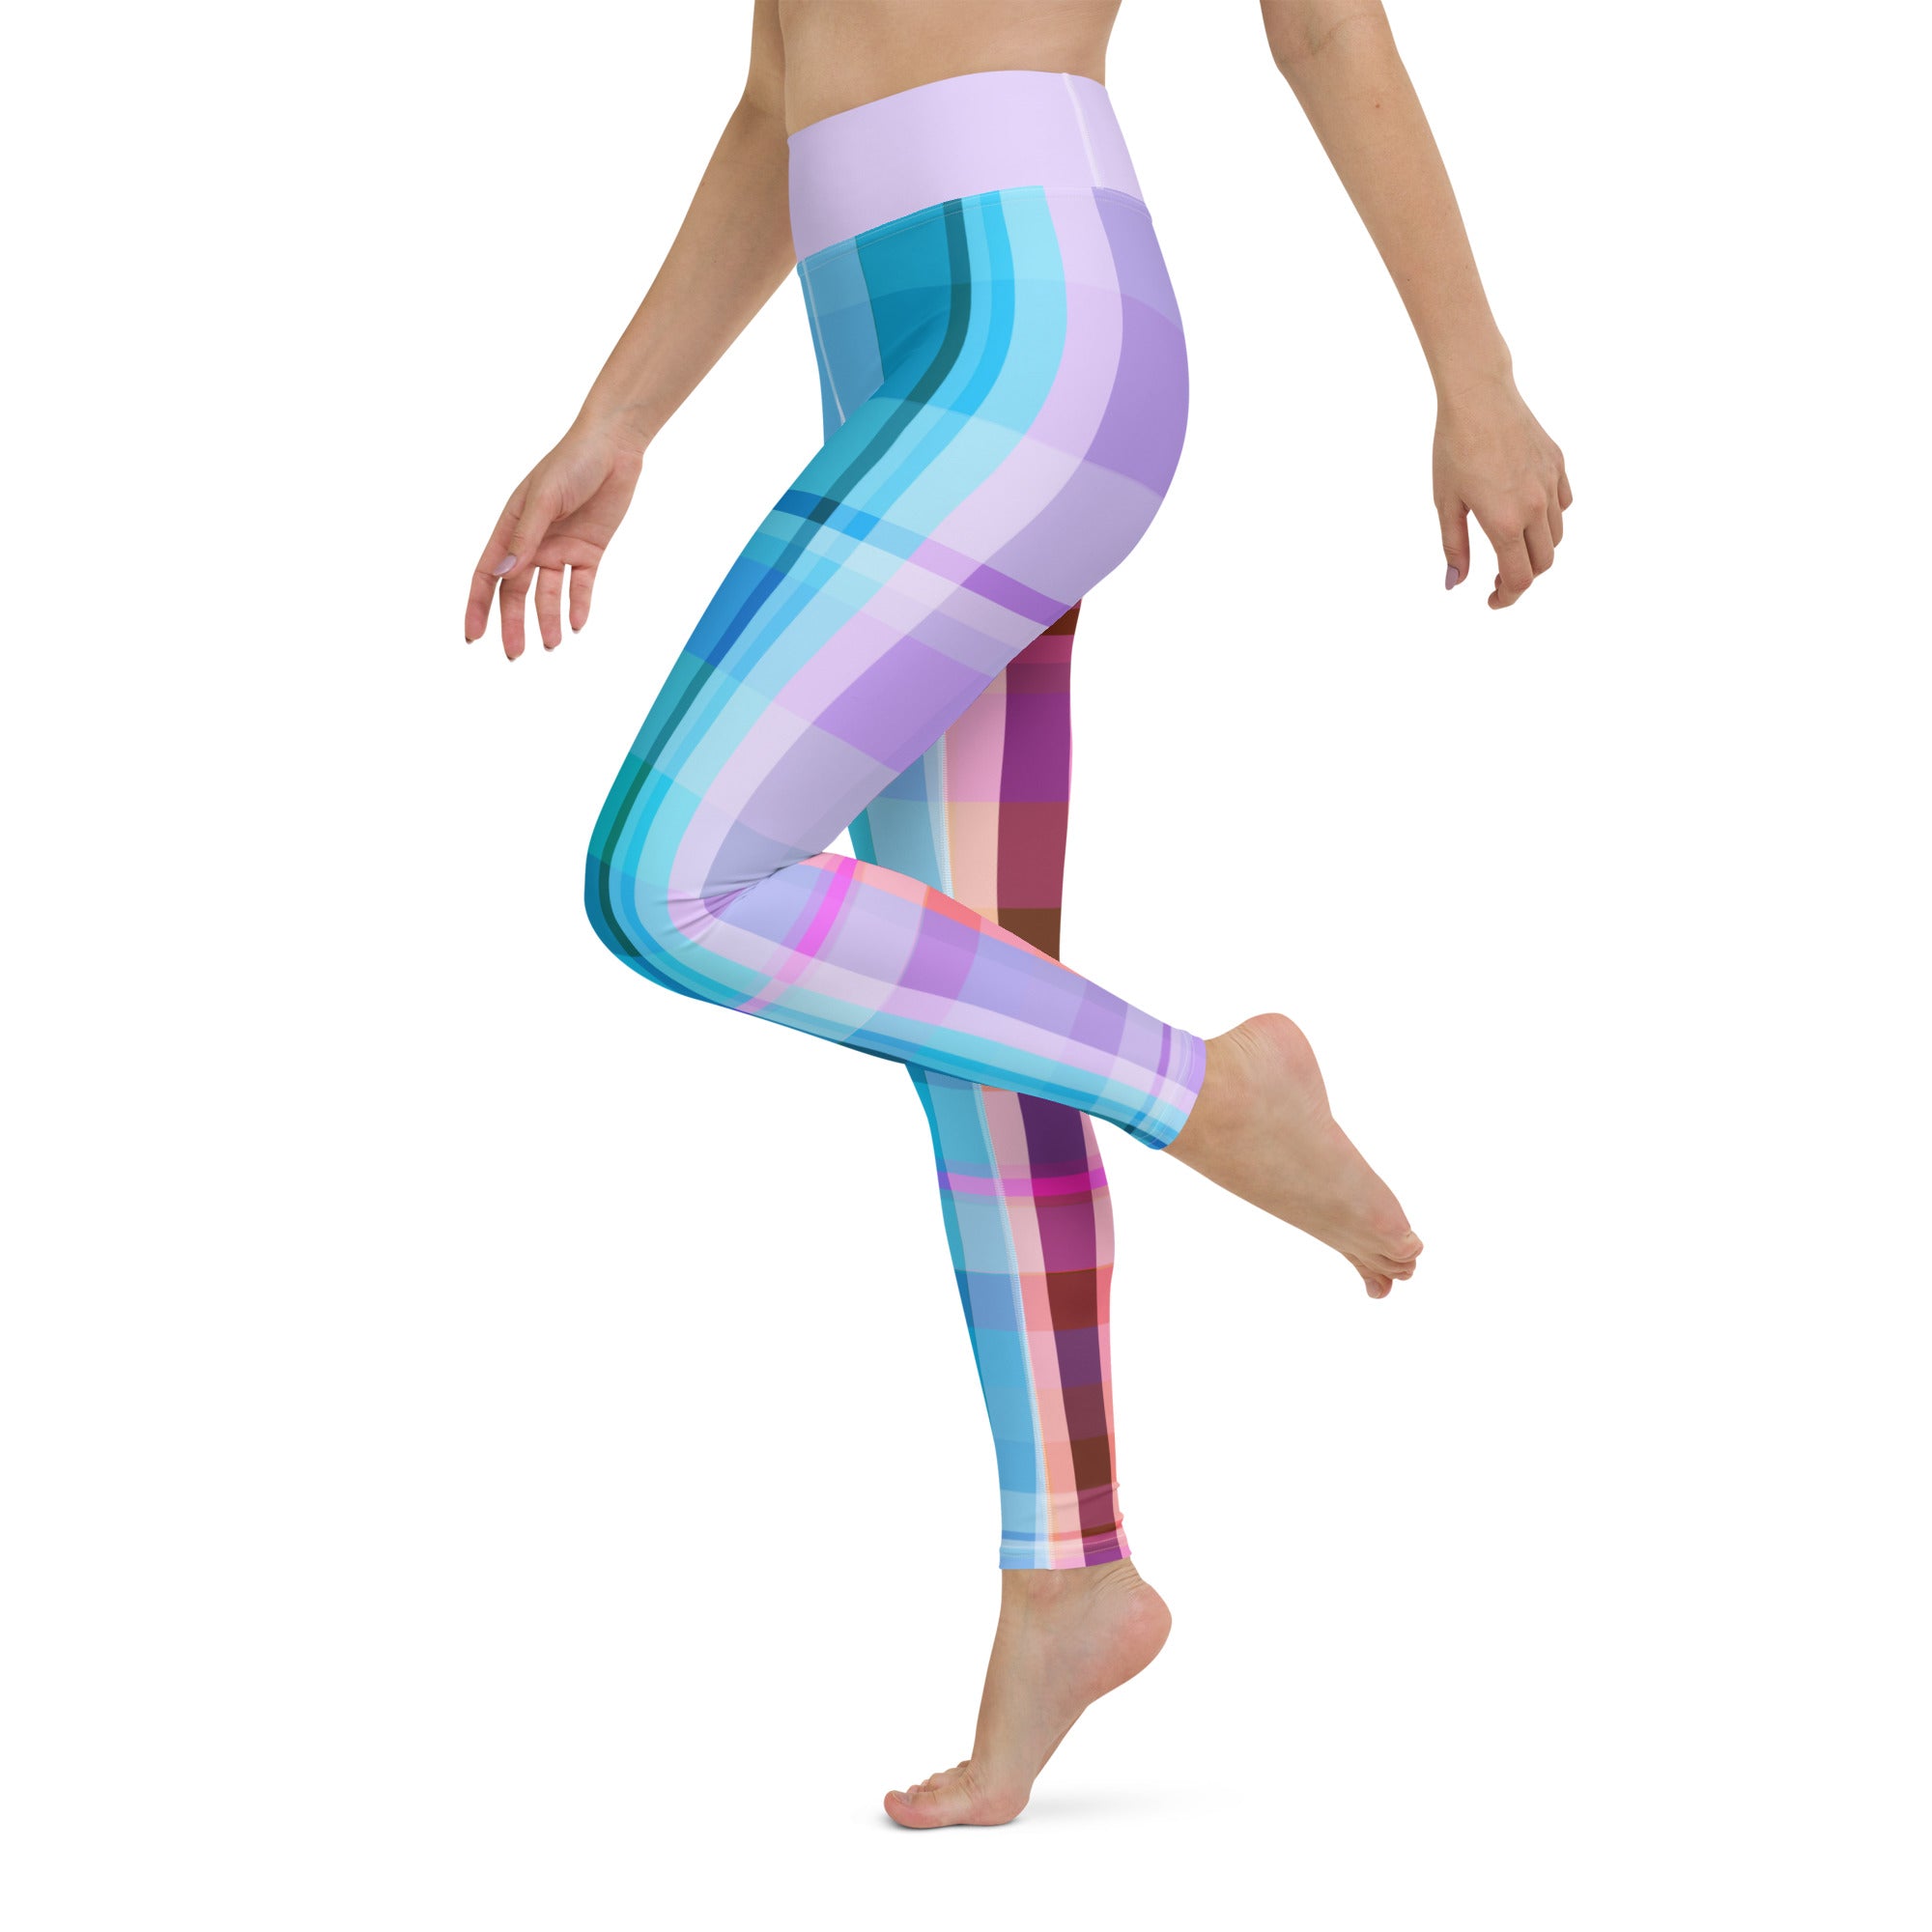 Stretchable Retro Rainbow Blast leggings, perfect for yoga, pilates, and any fitness enthusiast looking for a splash of color.